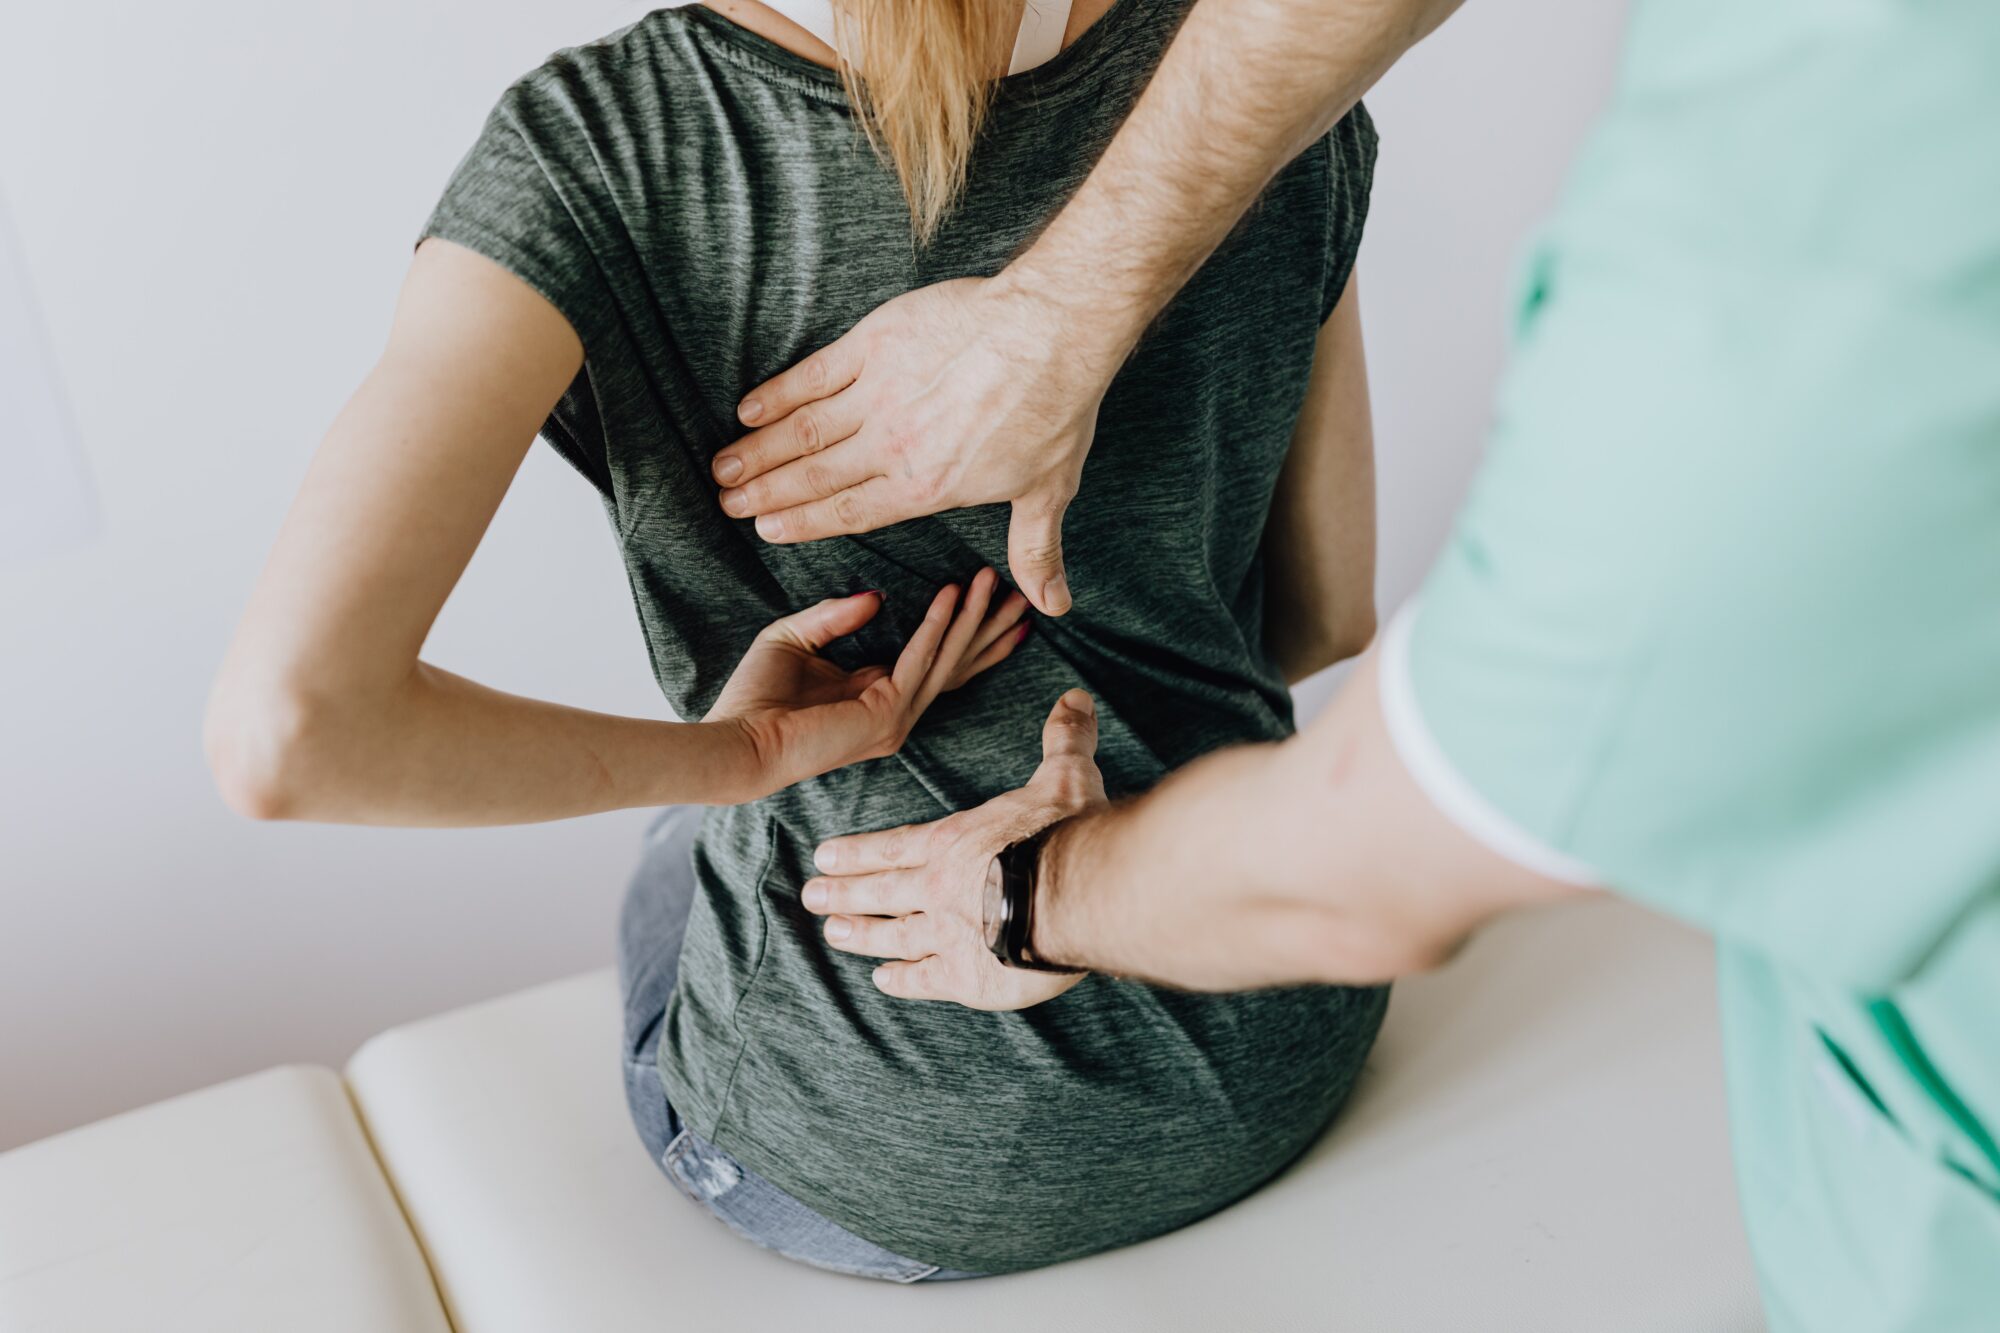 Discovering pain relief with chiropractic care